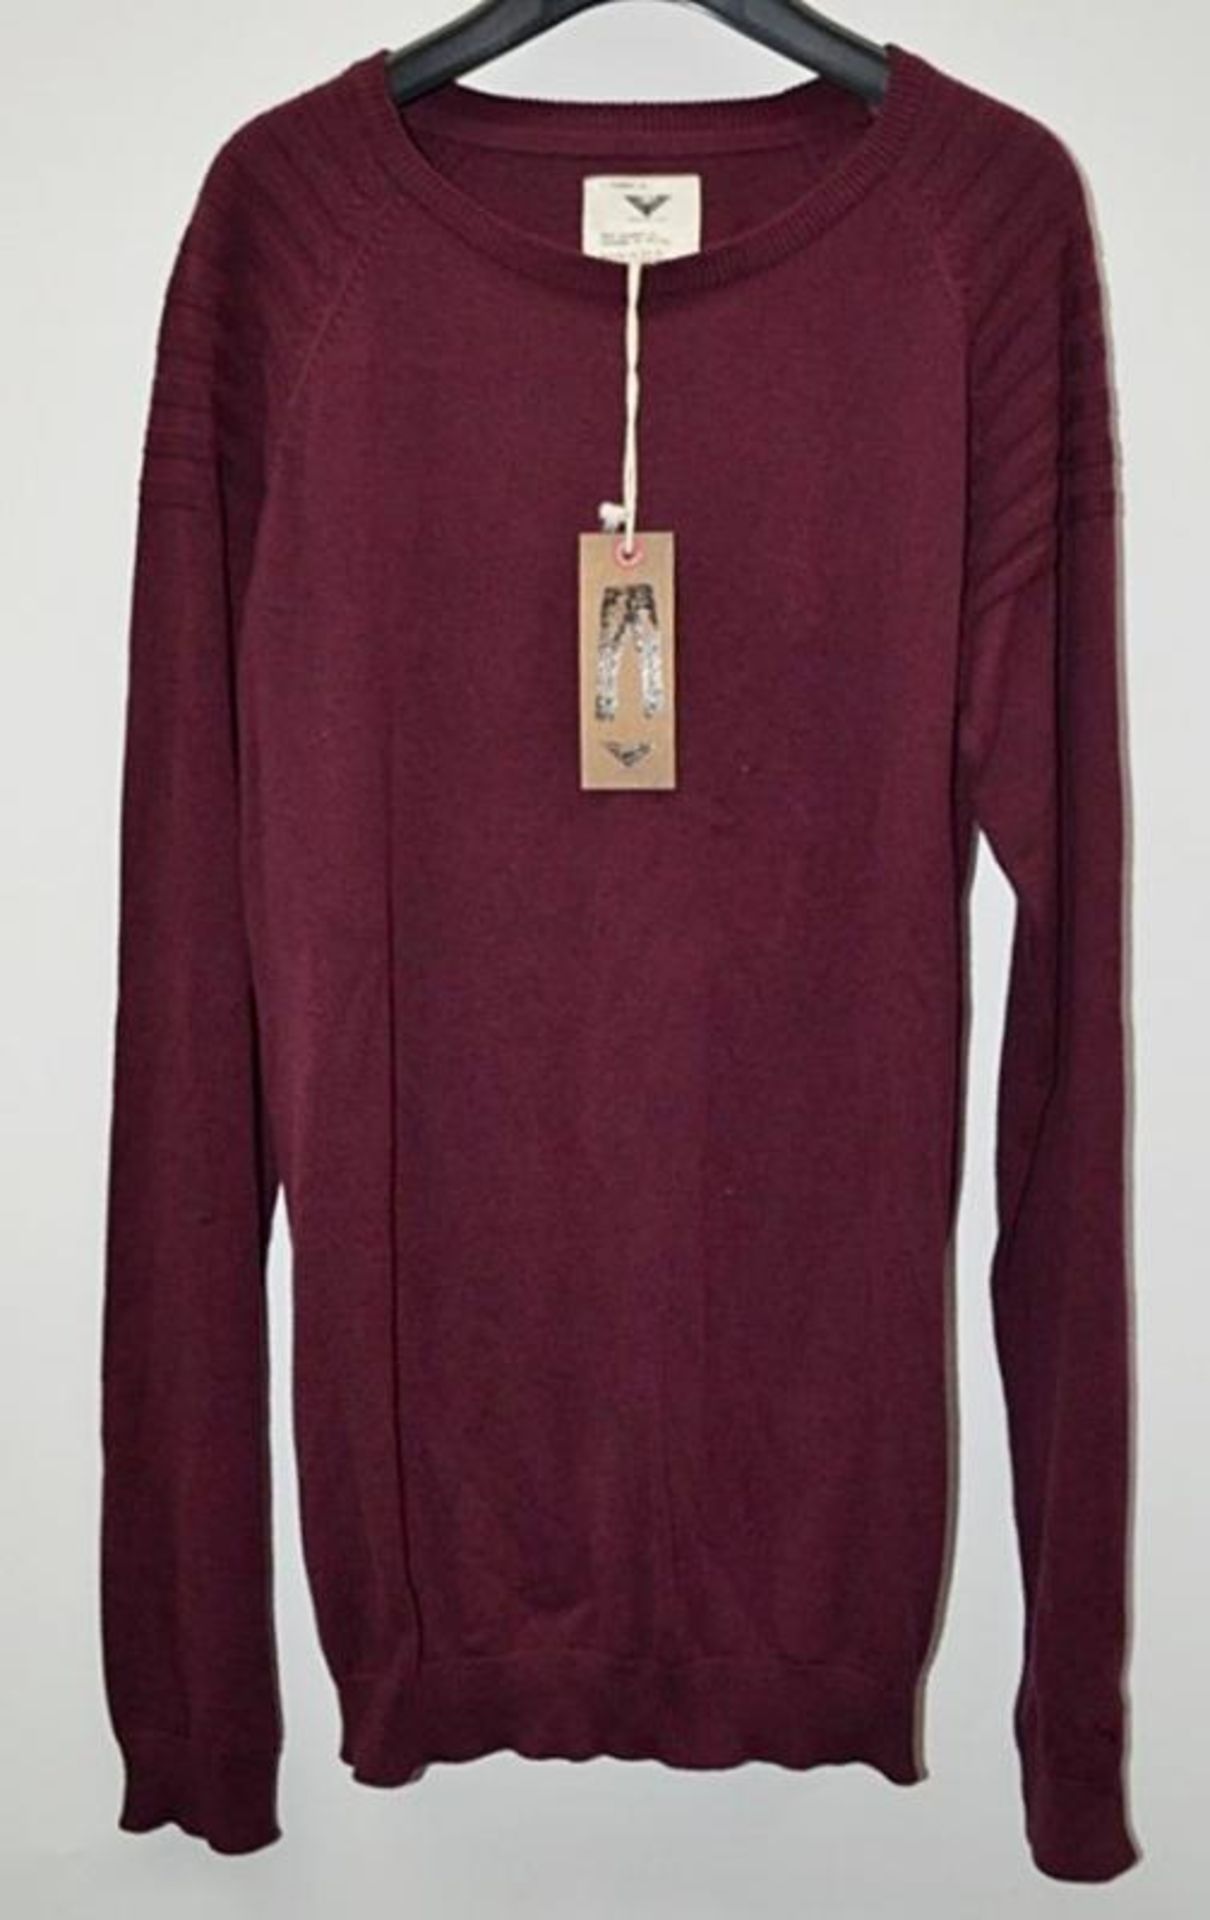 5 x Assorted GNIOUS Branded Long Sleeve Tops / Sweaters - New Stock With Tags - Recent Retail - Image 7 of 7